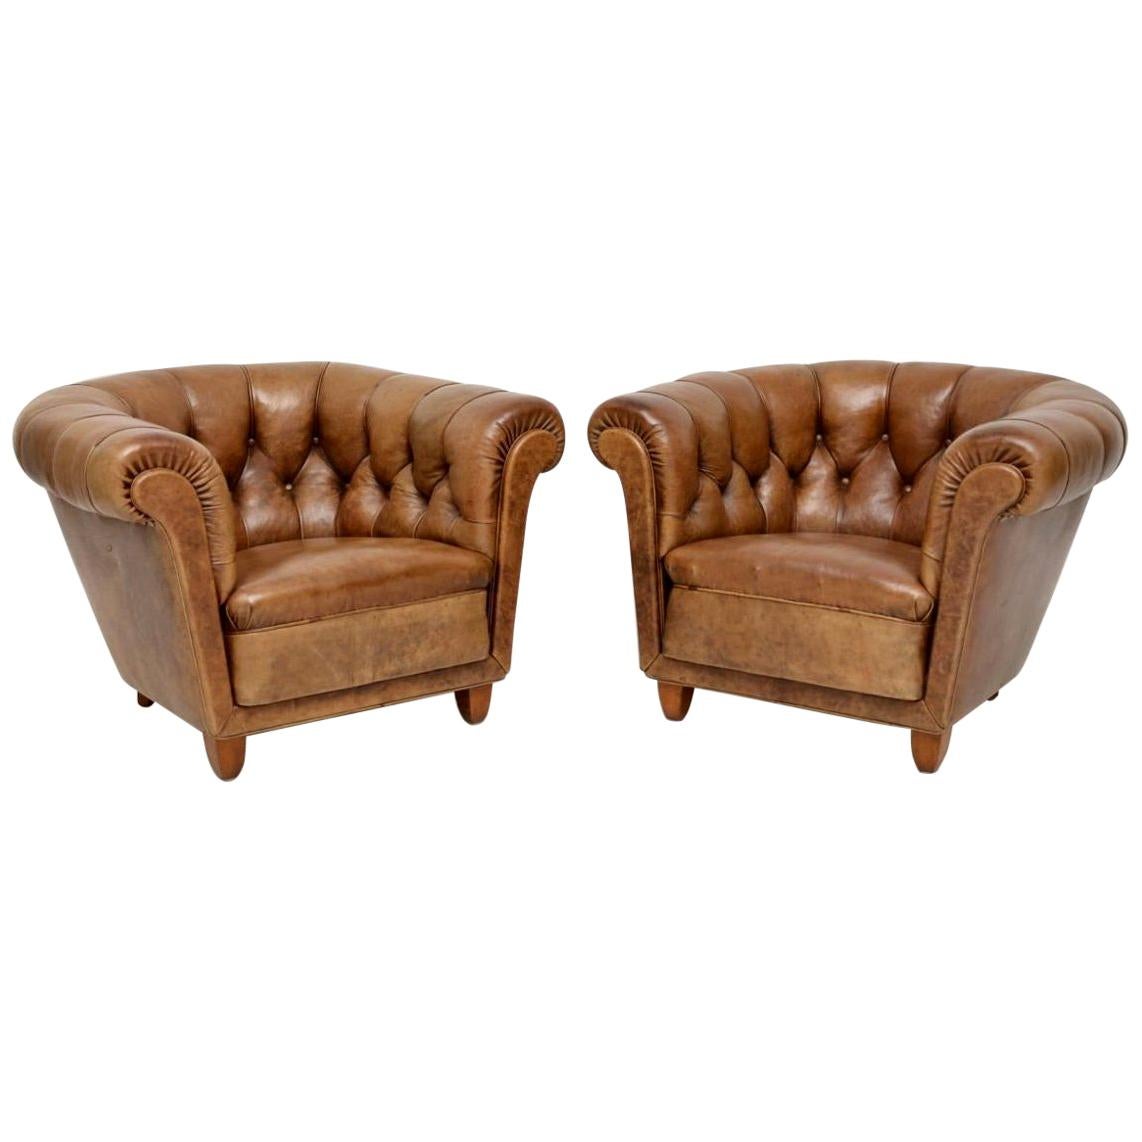  Pair of Antique Swedish Leather Chesterfield Armchairs